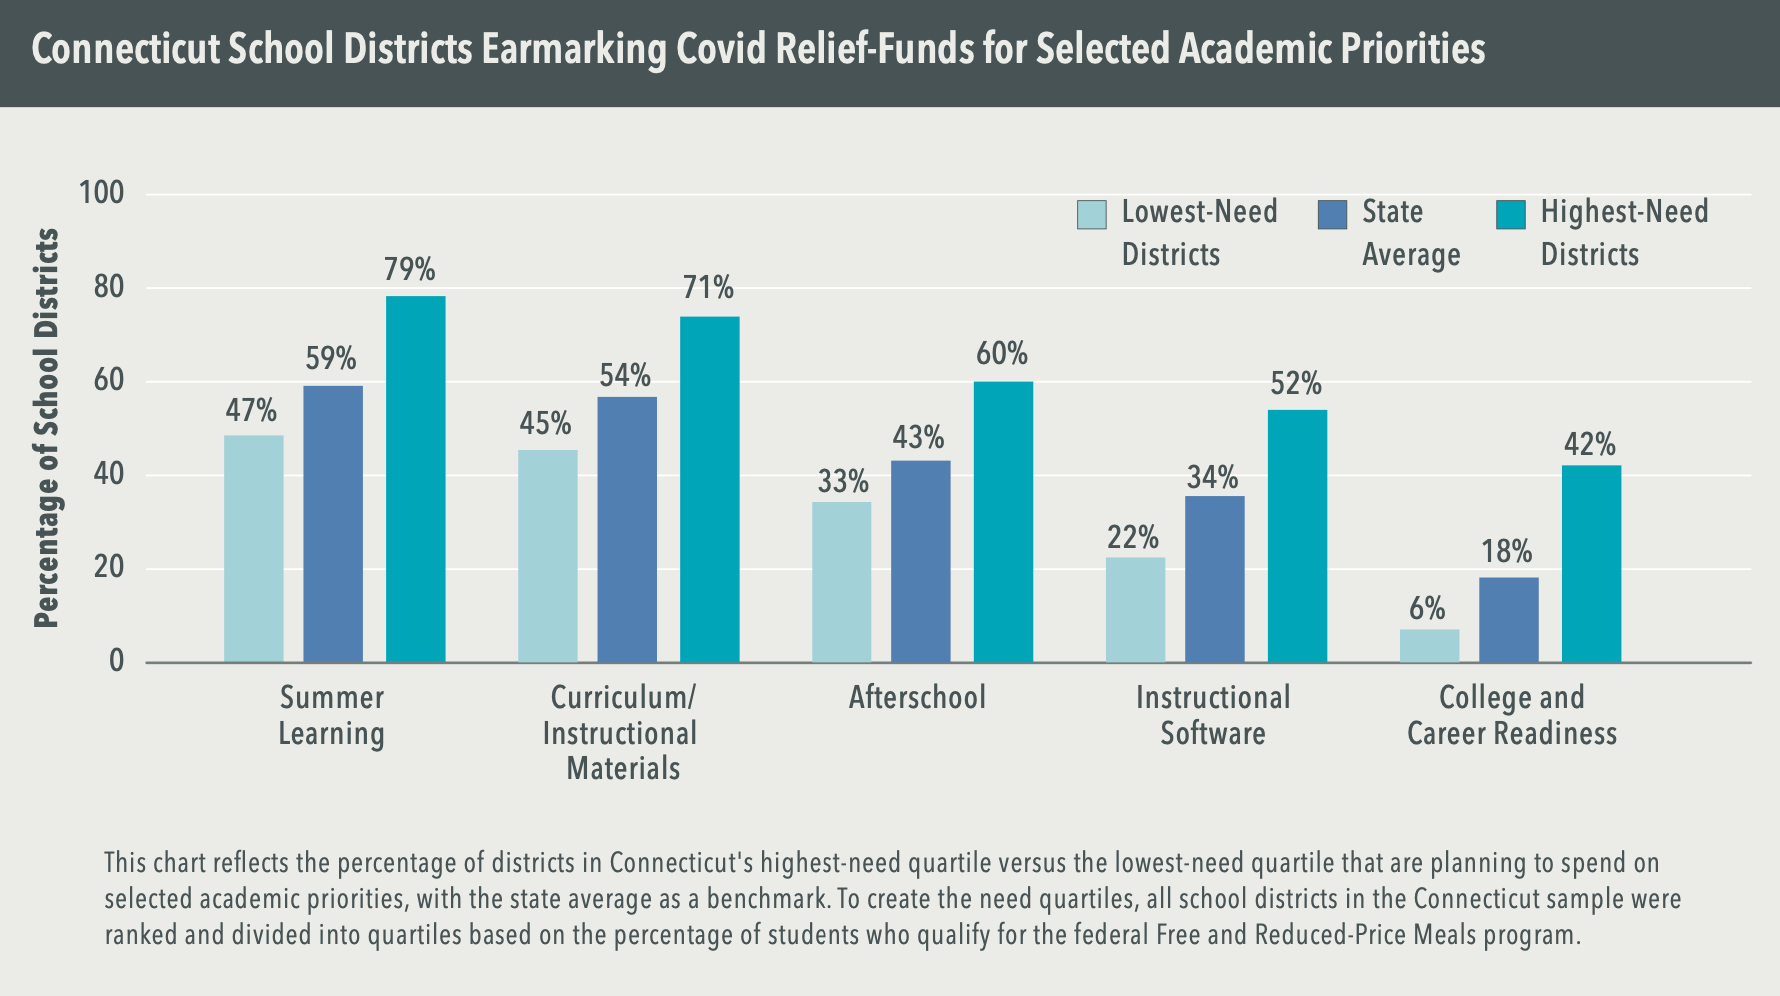 Chart: Connecticut School Districts Earmarking Covid Relief-Funds for Selected Academic Priorities. Percentage of school districts. Summer learning: 47% lowest-need districts, 59% state average, 79% highest-need districts. Curriculum/materials: 45% lowest-need districts, 54% state average, 71% highest-need districts. Afterschool: 33% lowest-need districts, 43% state average, 60% highest-need districts. Instructional software: 22% lowest-need districts, 34% state average, 52% highest-need districts. College and career: 6% lowest-need districts, 18% state average, 42% highest-need districts. (This chart reflects the percentage of districts in Connecticut's highest-need quartile versus the lowest-need quartile that are planning to spend on selected academic priorities, with the state average as a benchmark. To create the need quartiles, all school districts in the Connecticut sample were ranked and divided into quartiles based on the percentage of students who qualify for the federal Free and Reduced-Price Meals program.)